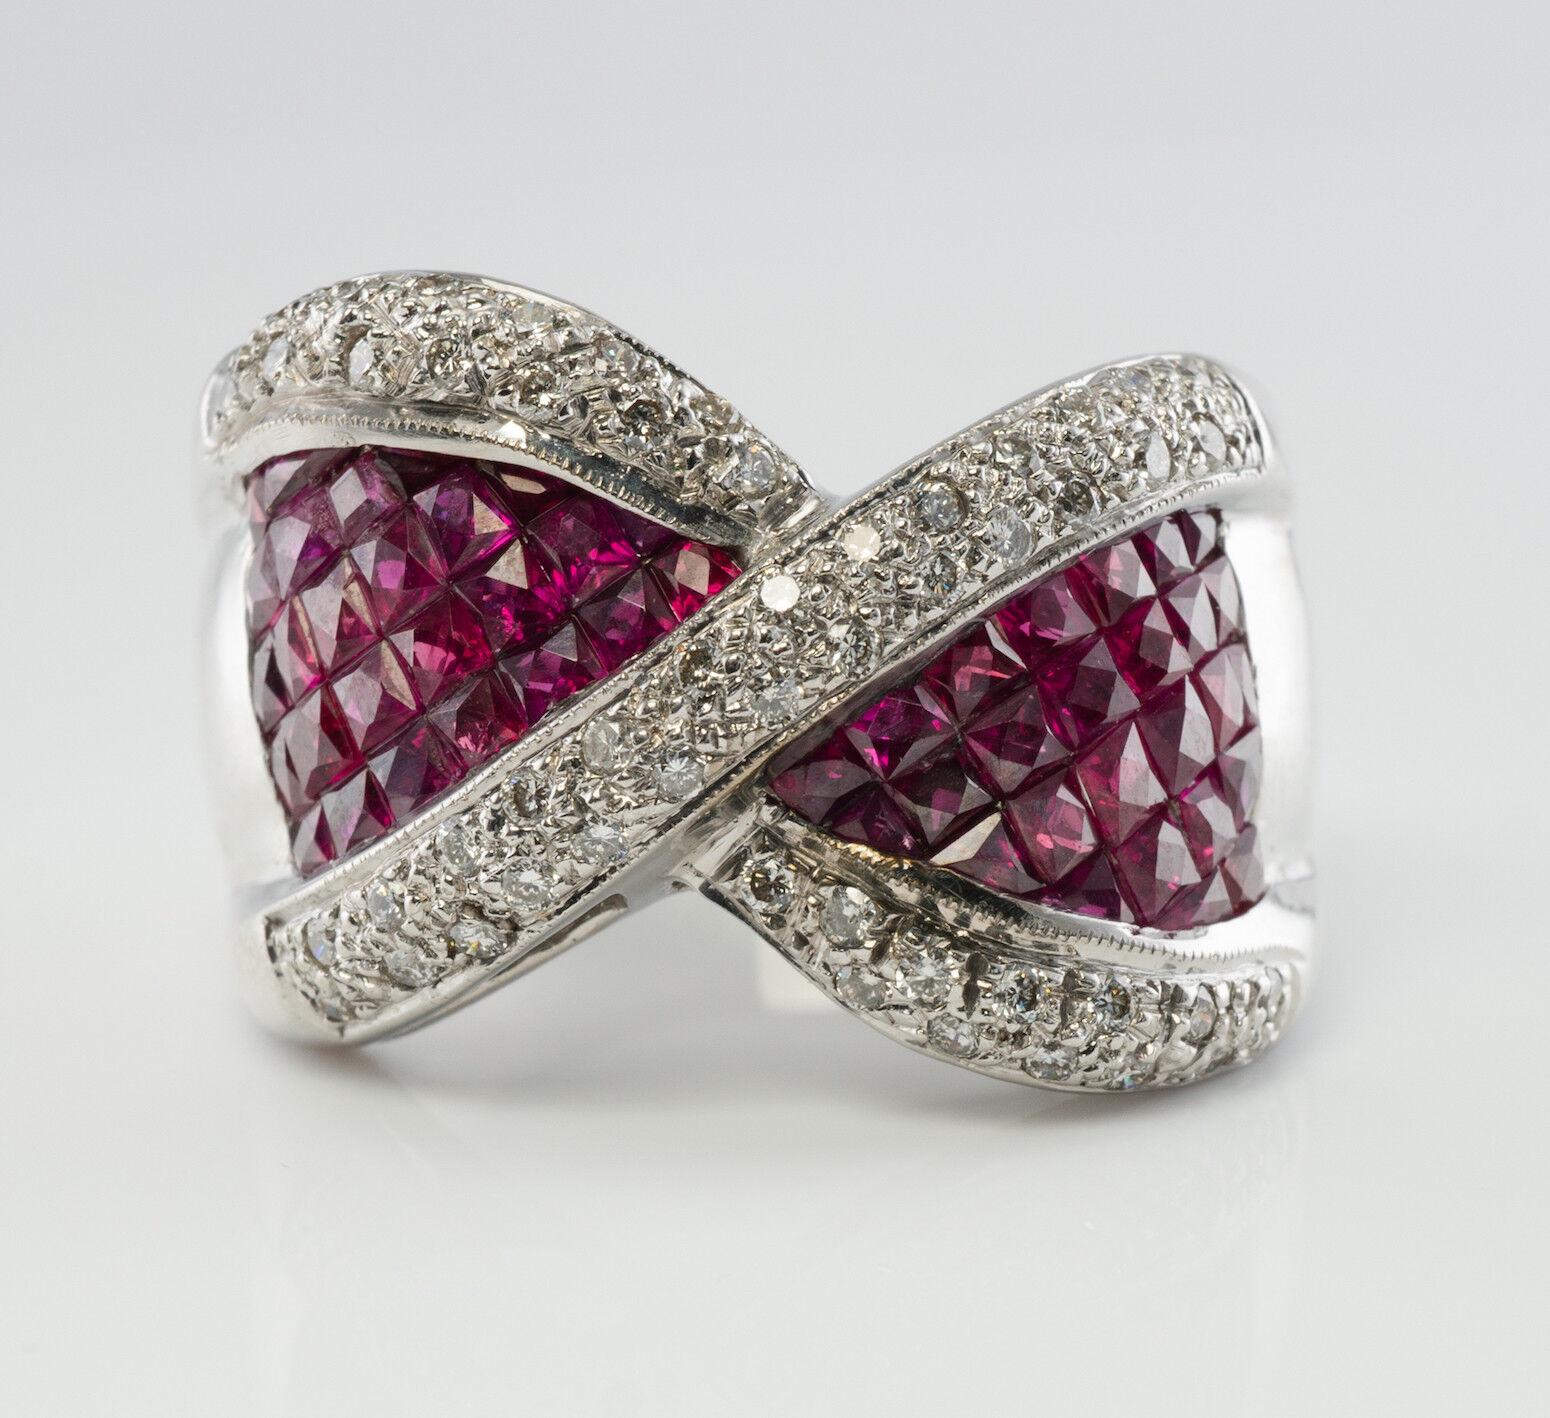 This high-end estate ring is finely crafted in solid 18K White gold and set with the highest quality Earth-mined French-cut Rubies and Diamonds. There are 26 French cut Rubies on each side of the pretty bow. These Rubies are very clean and